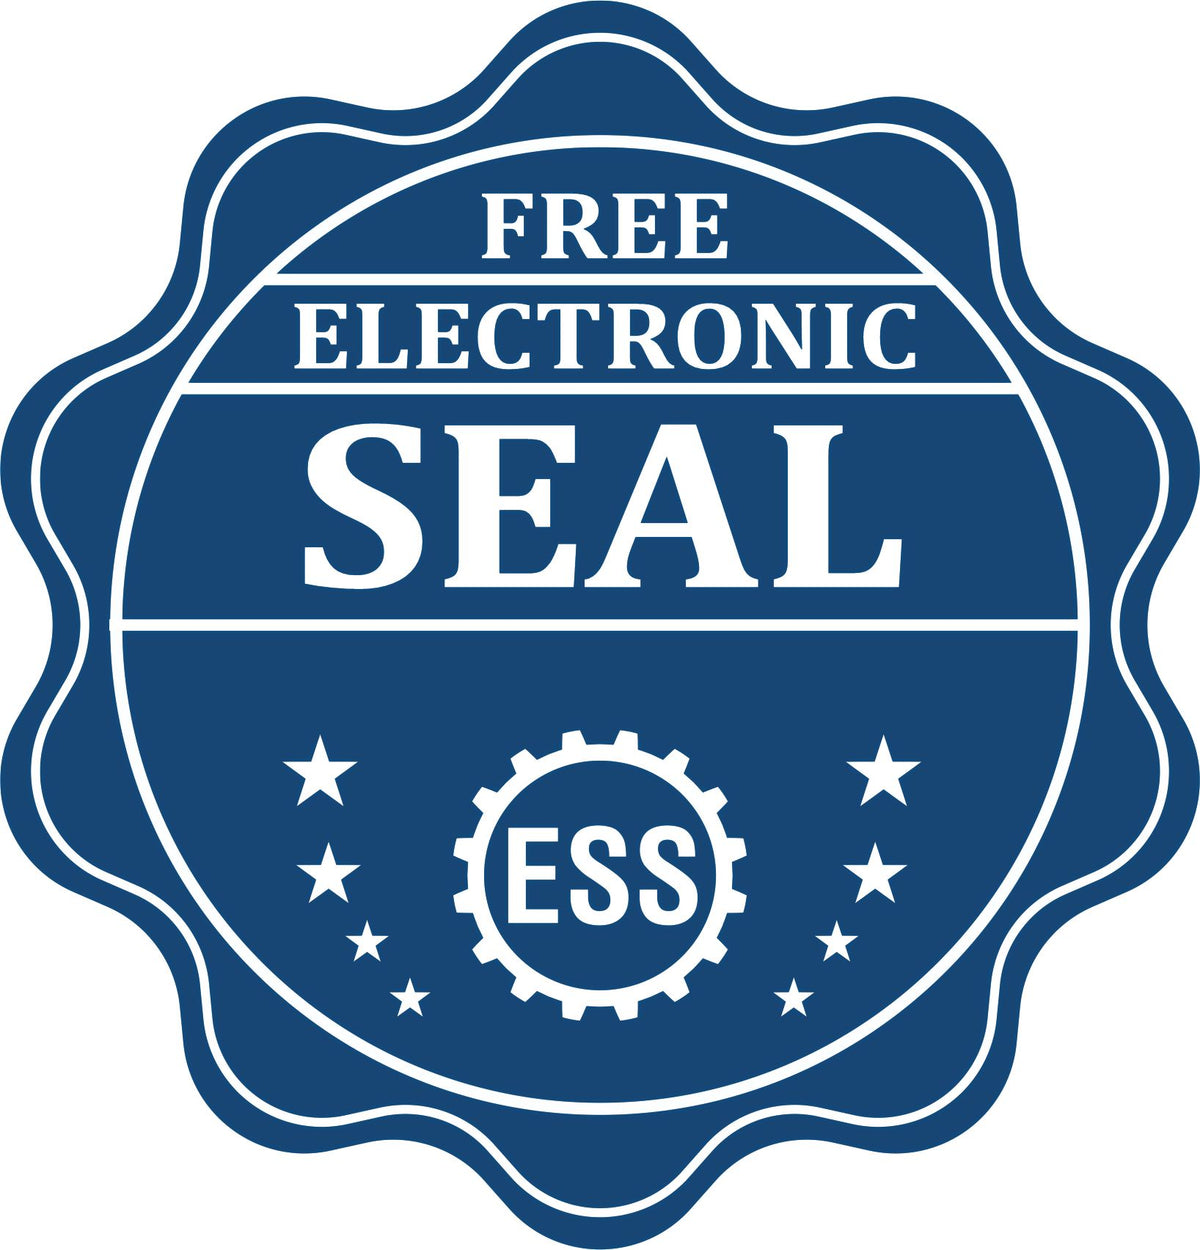 A badge showing a free electronic seal for the Gift Mississippi Engineer Seal with stars and the ESS gear on the emblem.